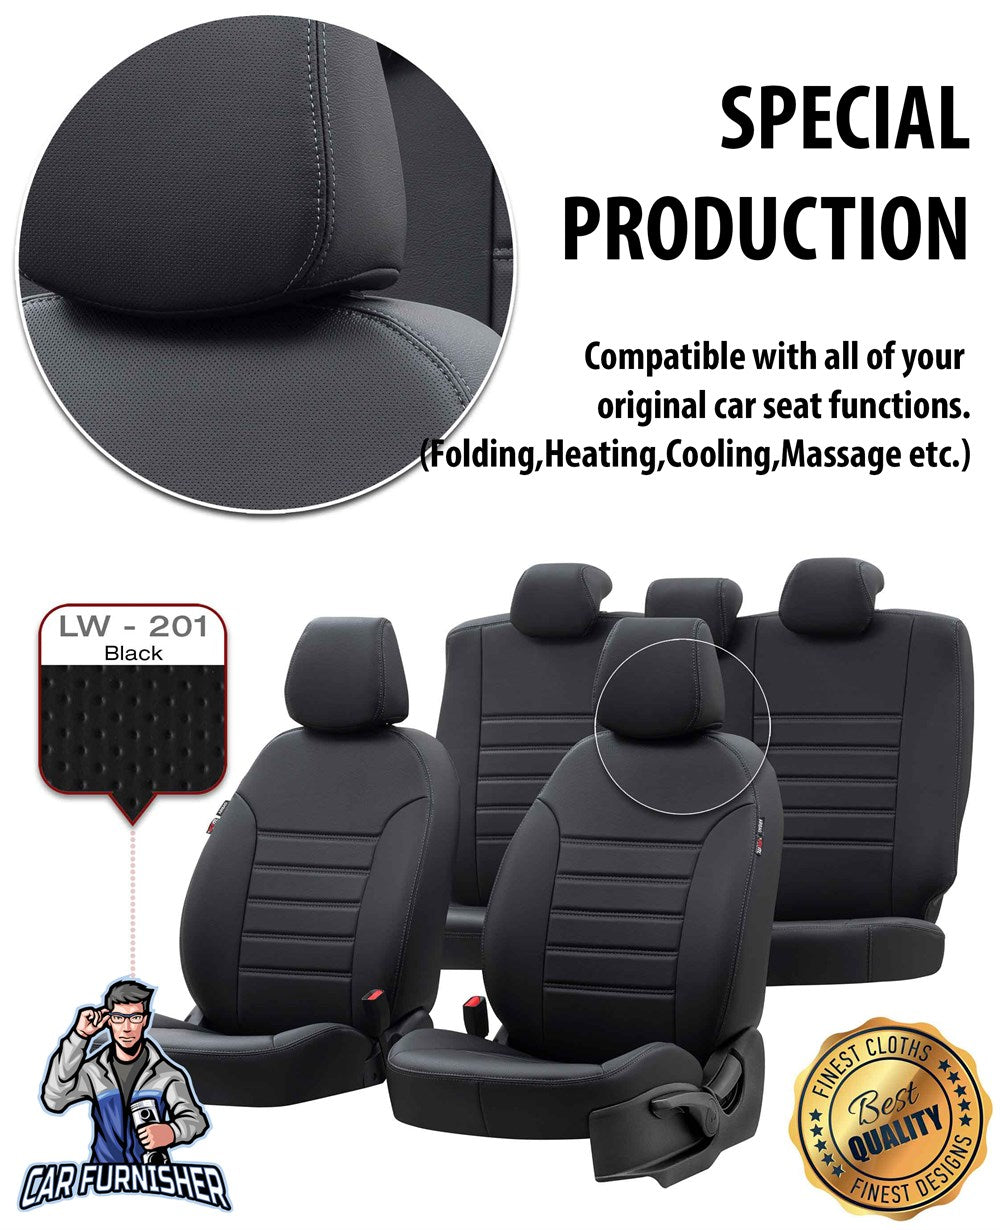 Ssangyong Actyon Seat Covers Istanbul Leather Design Black Leather